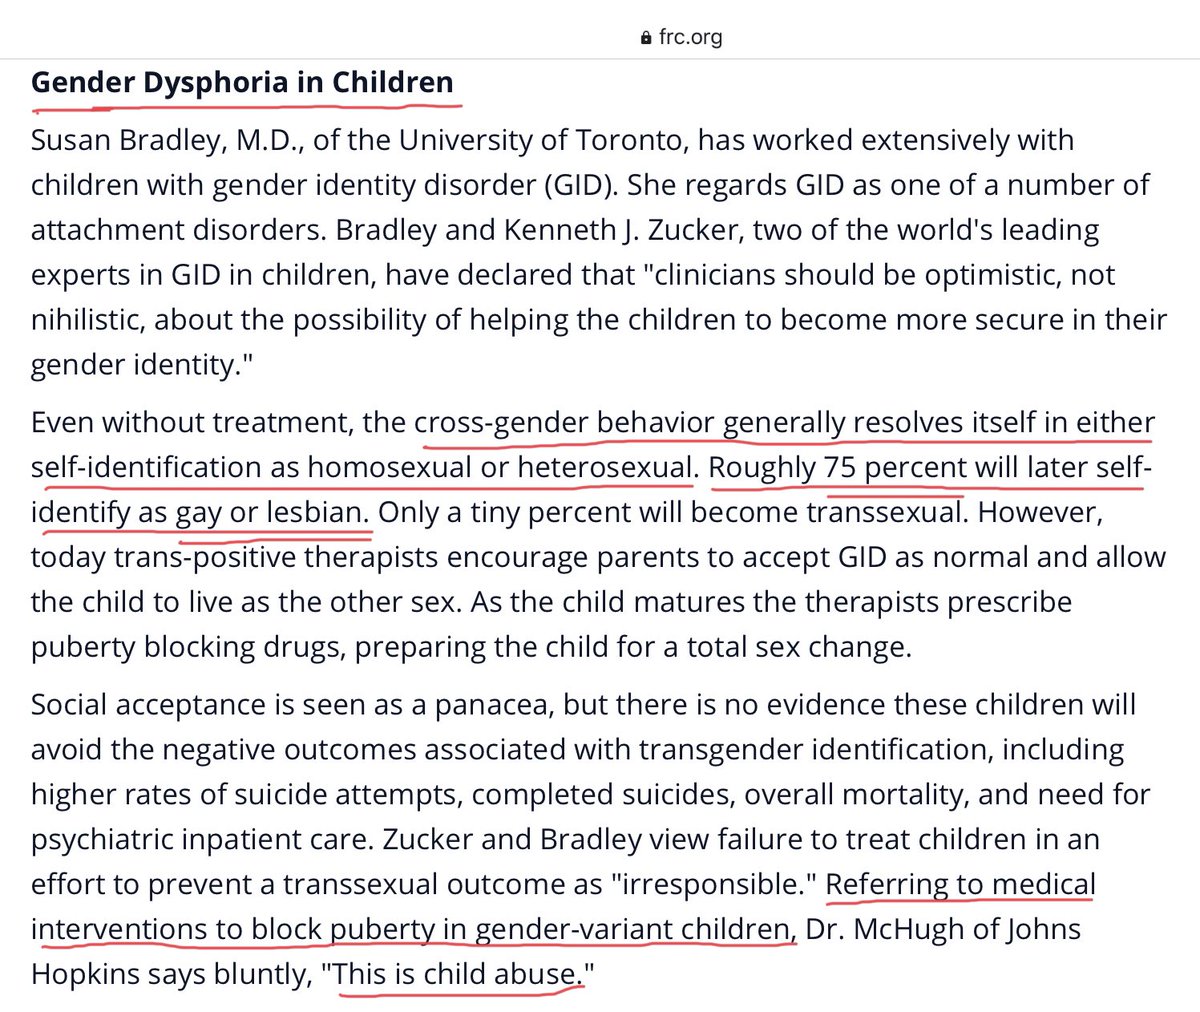 Here’s what the 2015 FRC report goes says about gender dysphoria and trans-identification in children, “cross-gender behavior generally resolves itself in either self-identification as homosexual or heterosexual. Roughly 75 percent will later self-identify as gay or lesbian.”